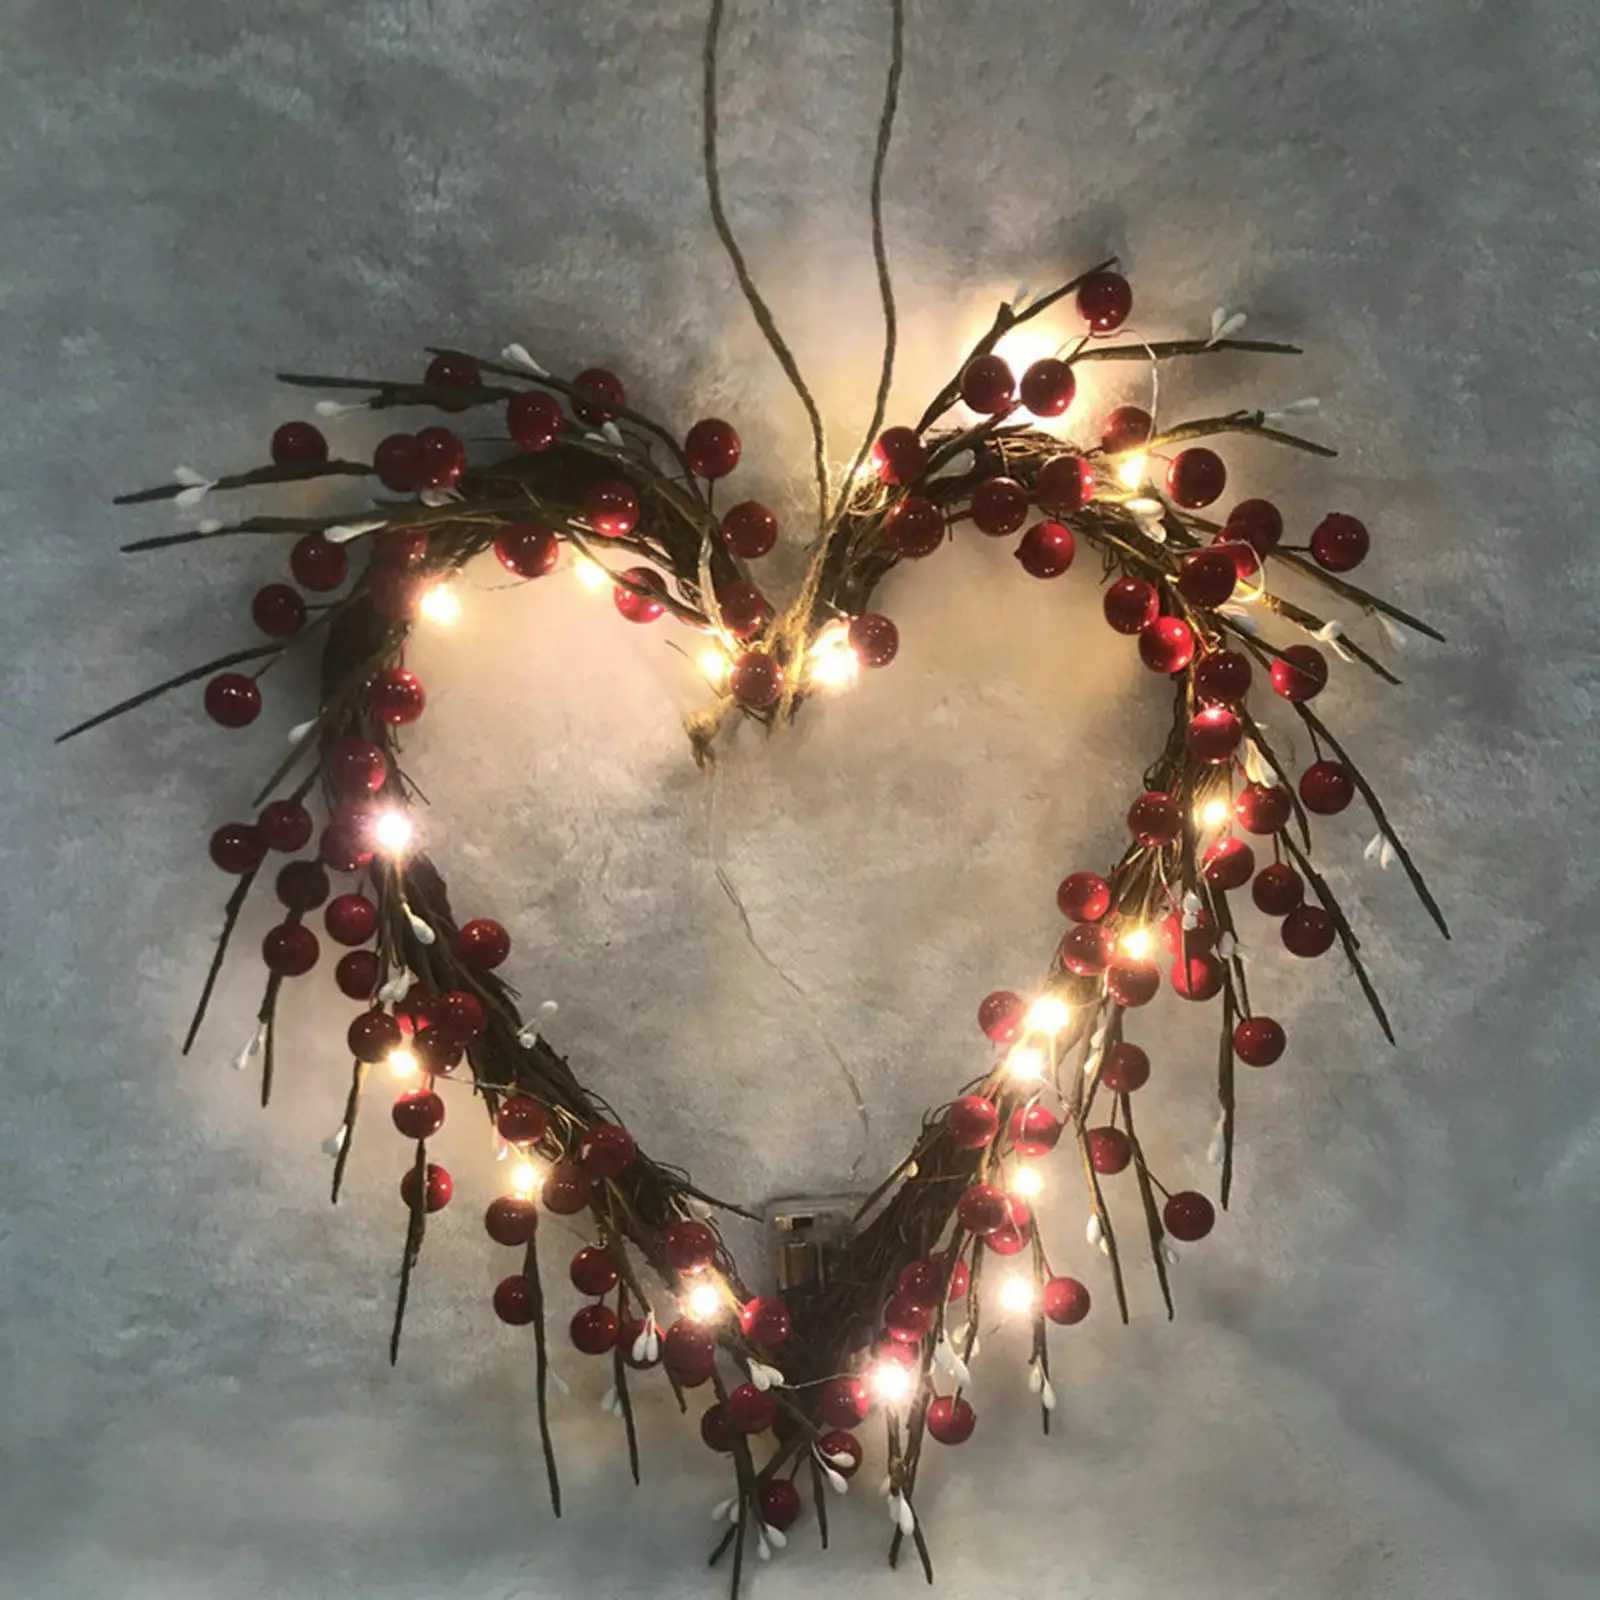 Heart Shape stunning Red Wreath, Lighted Clusters Christmas Garland Day Wedding Decor Housewarming Gift